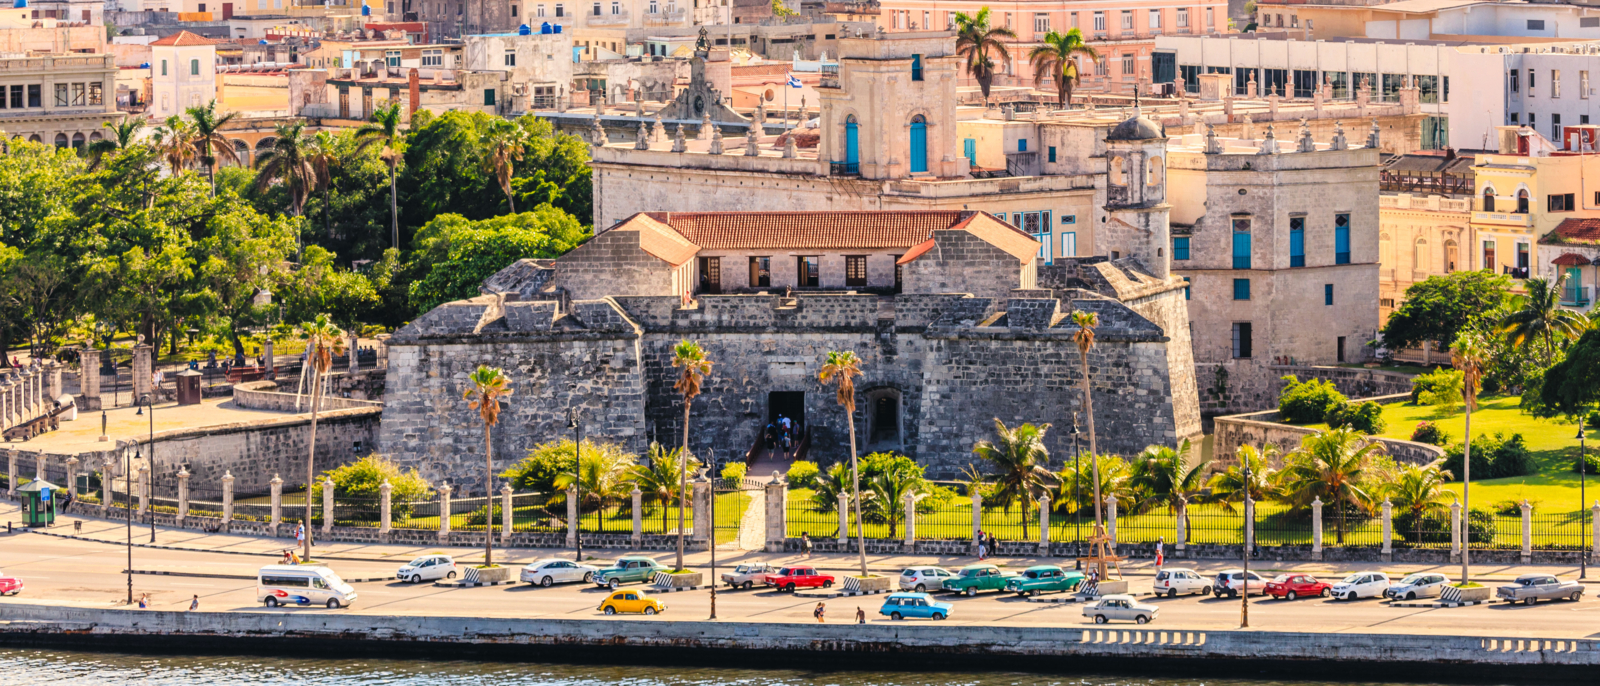 View to old fortress on Malecon street and old city center, Havana, Cuba